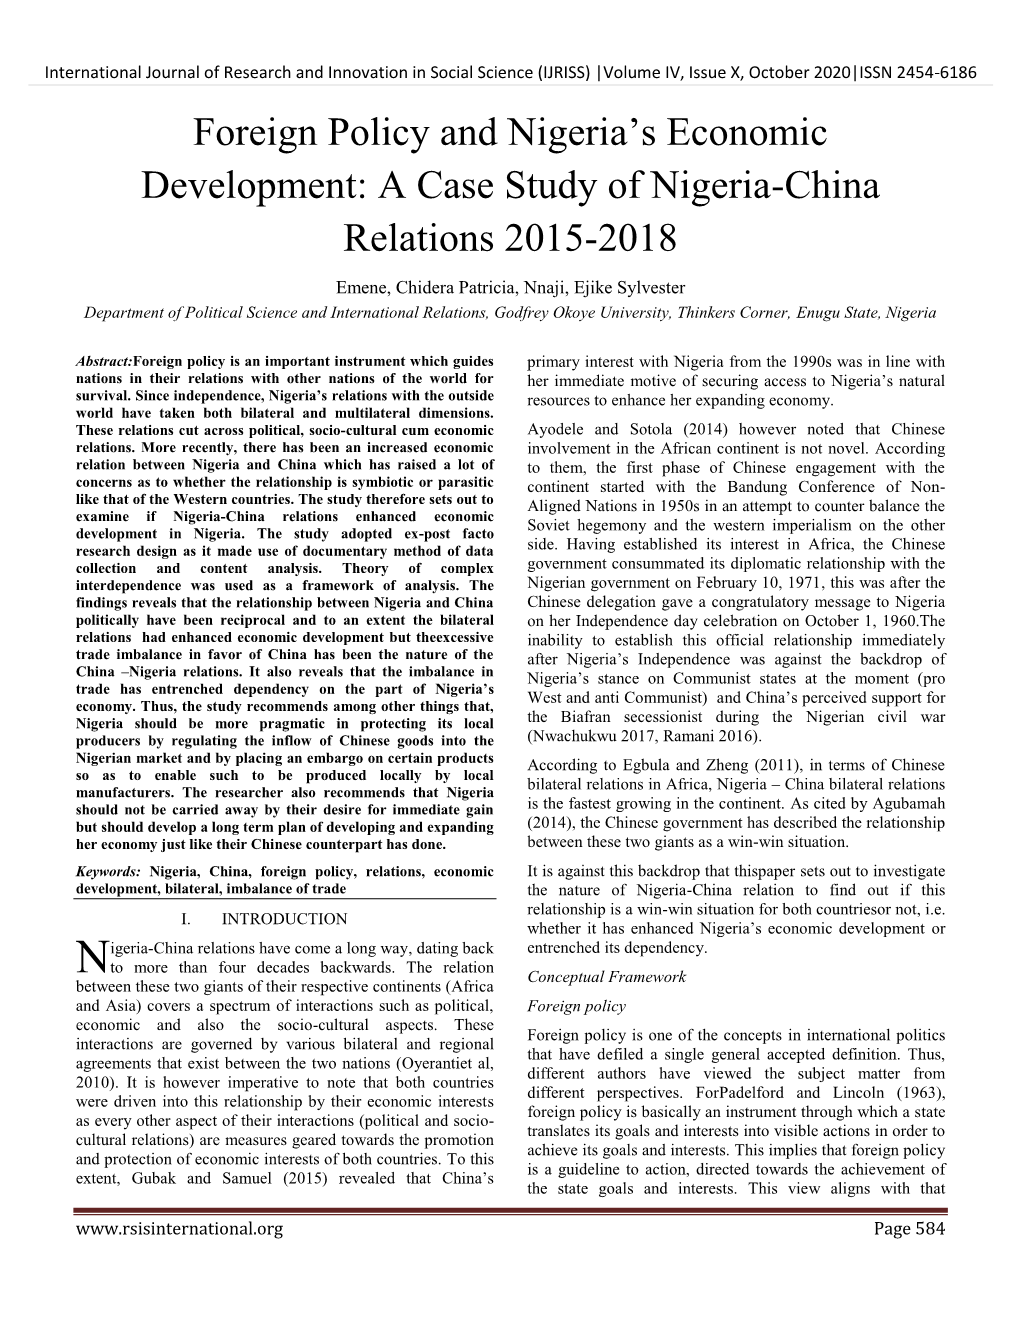 Foreign Policy and Nigeria's Economic Development: a Case Study of Nigeria-China Relations 2015-2018